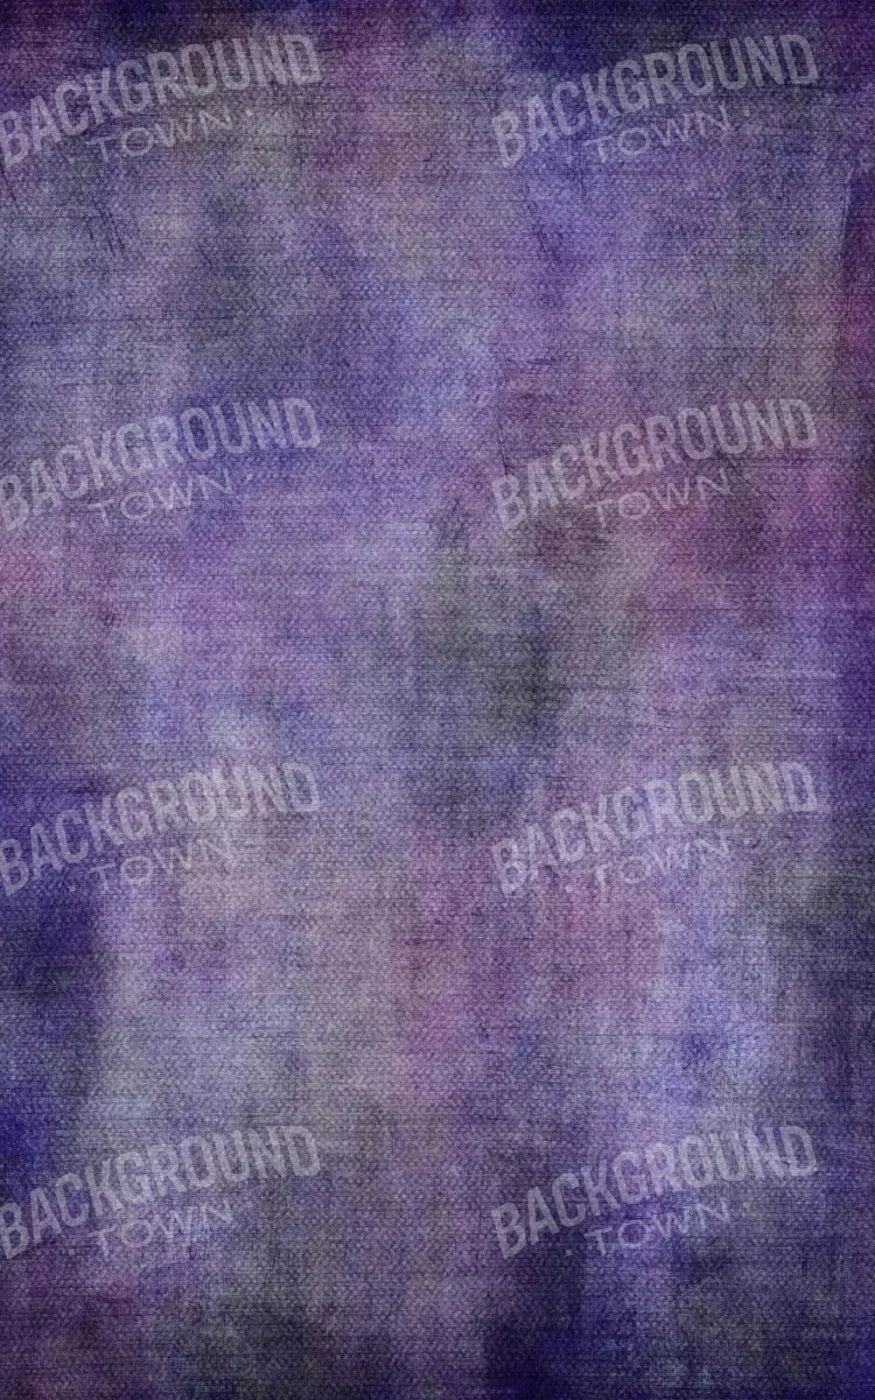 Berrymore 9X14 Ultracloth ( 108 X 168 Inch ) Backdrop